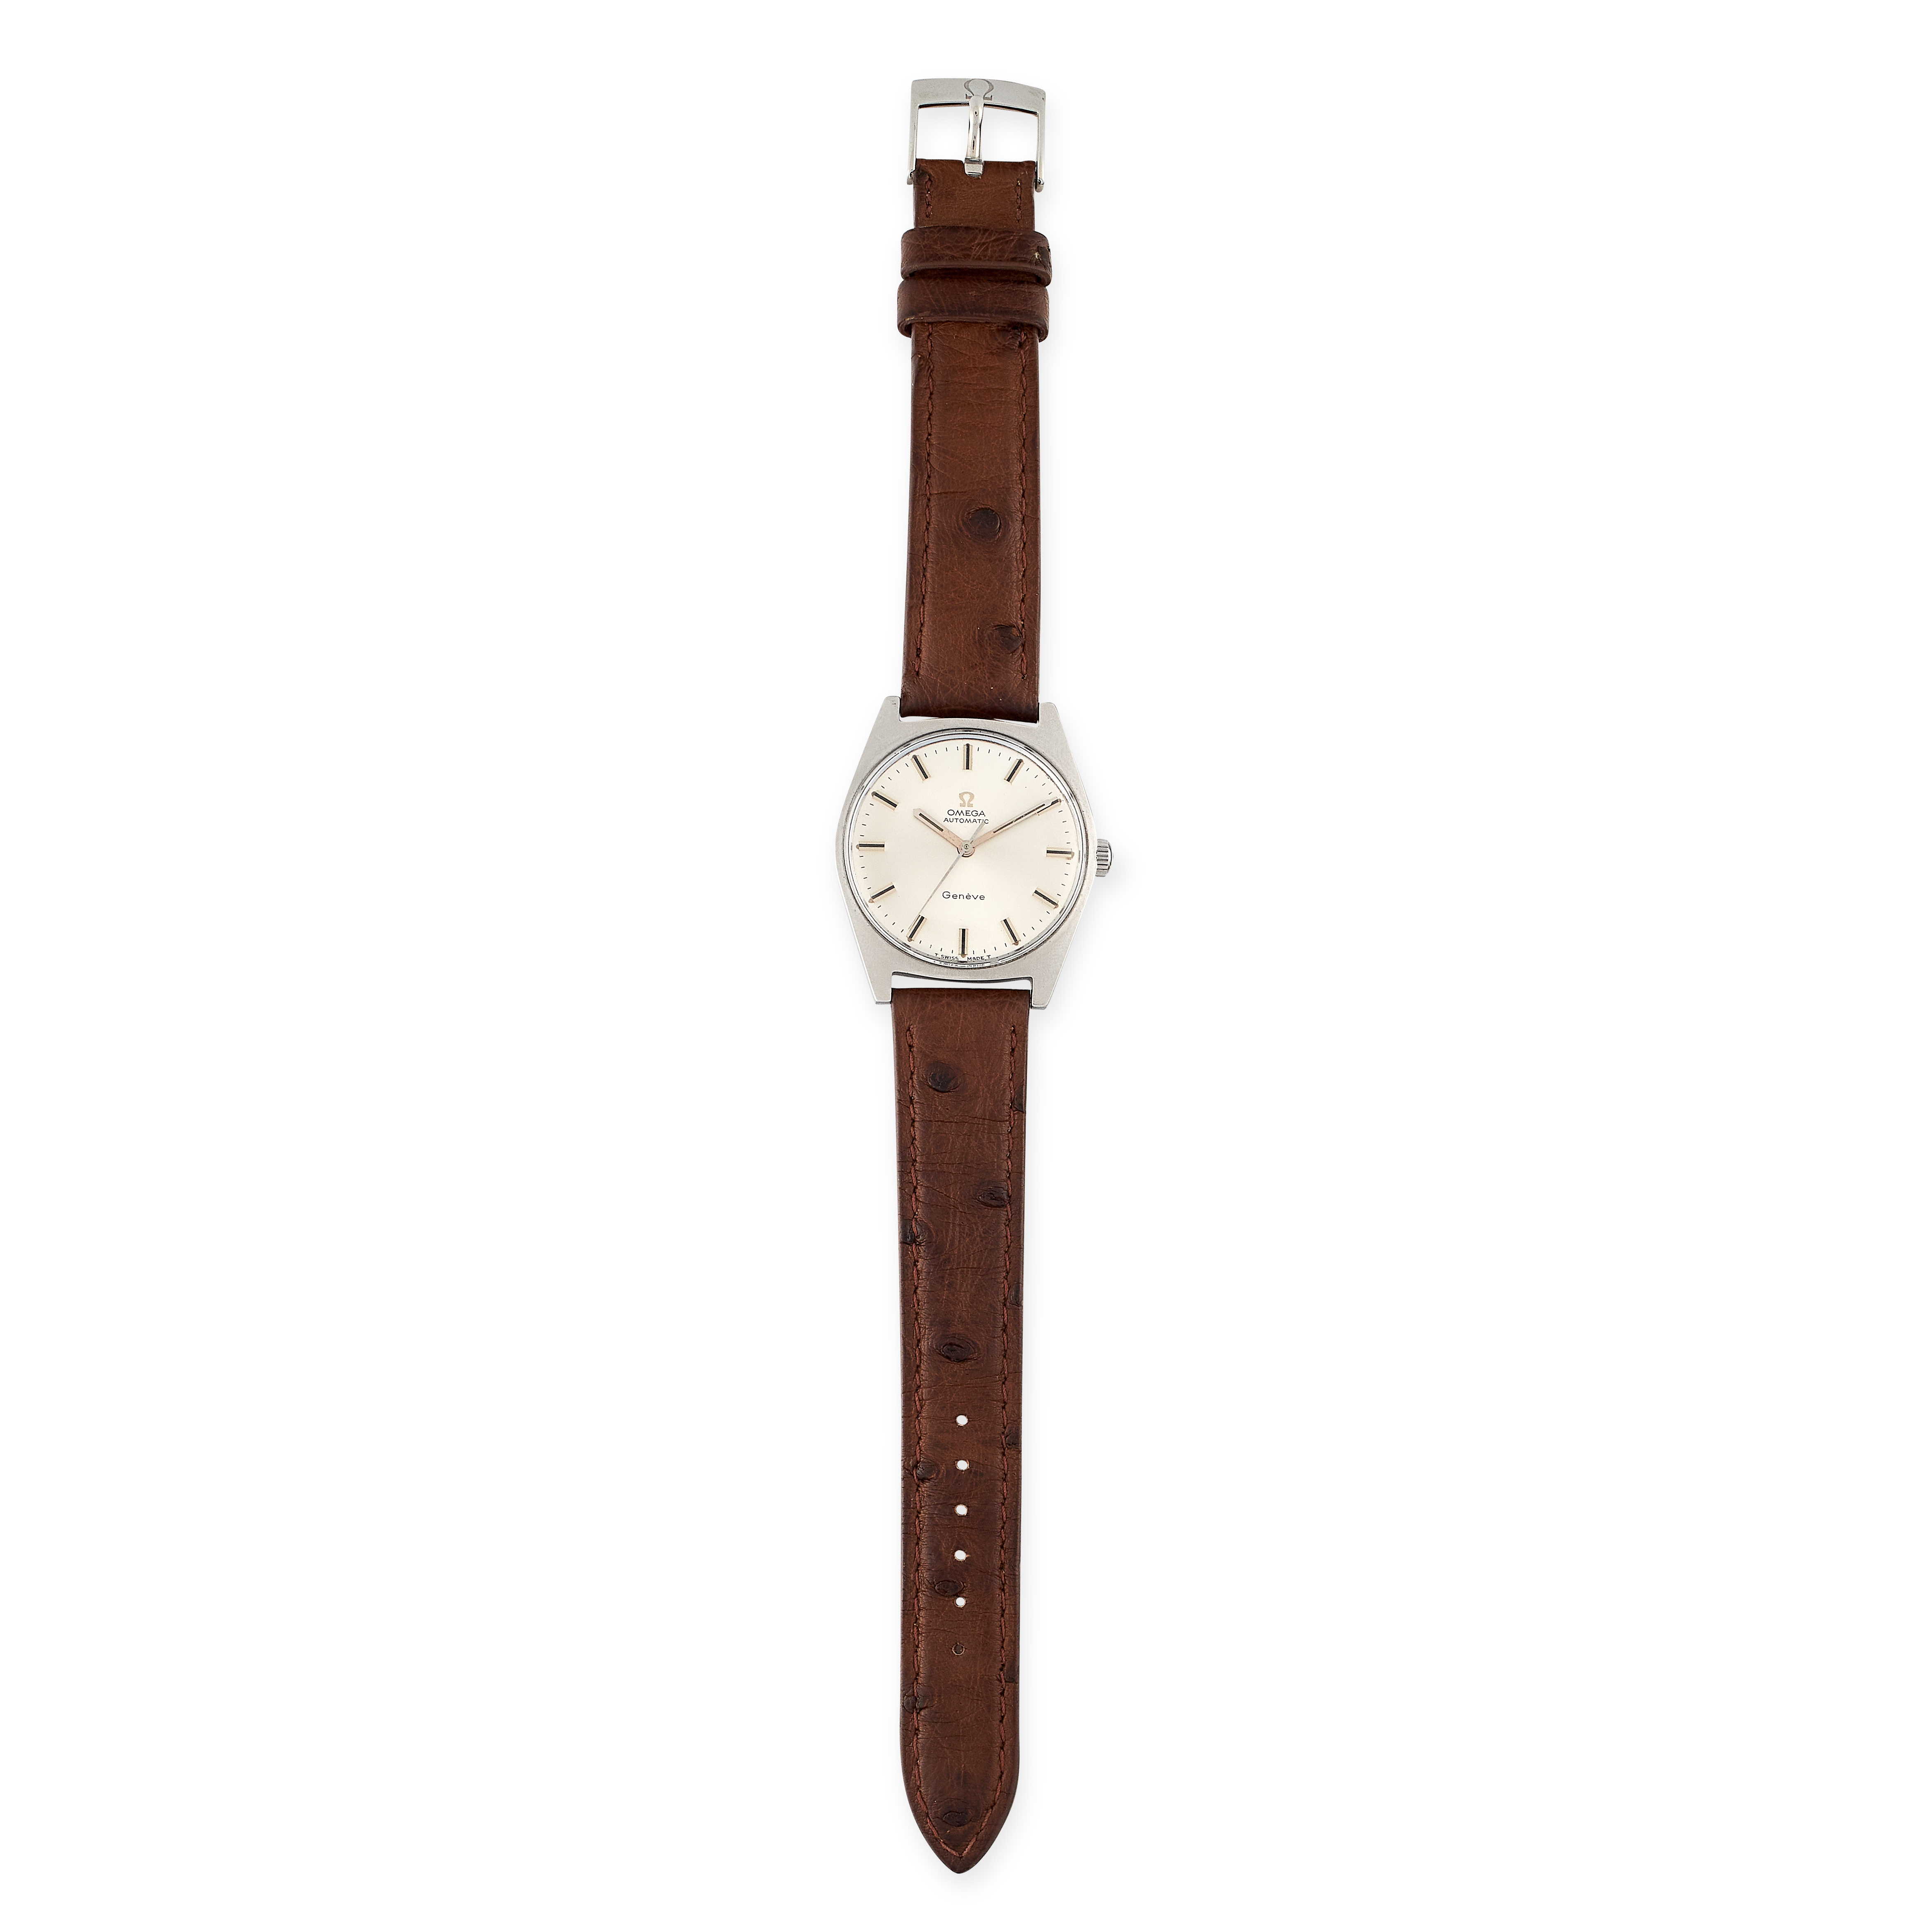 A OMEGA GENEVE WRIST WATCH with white dial and brown leather strap, 23.5cm, 43.2g.